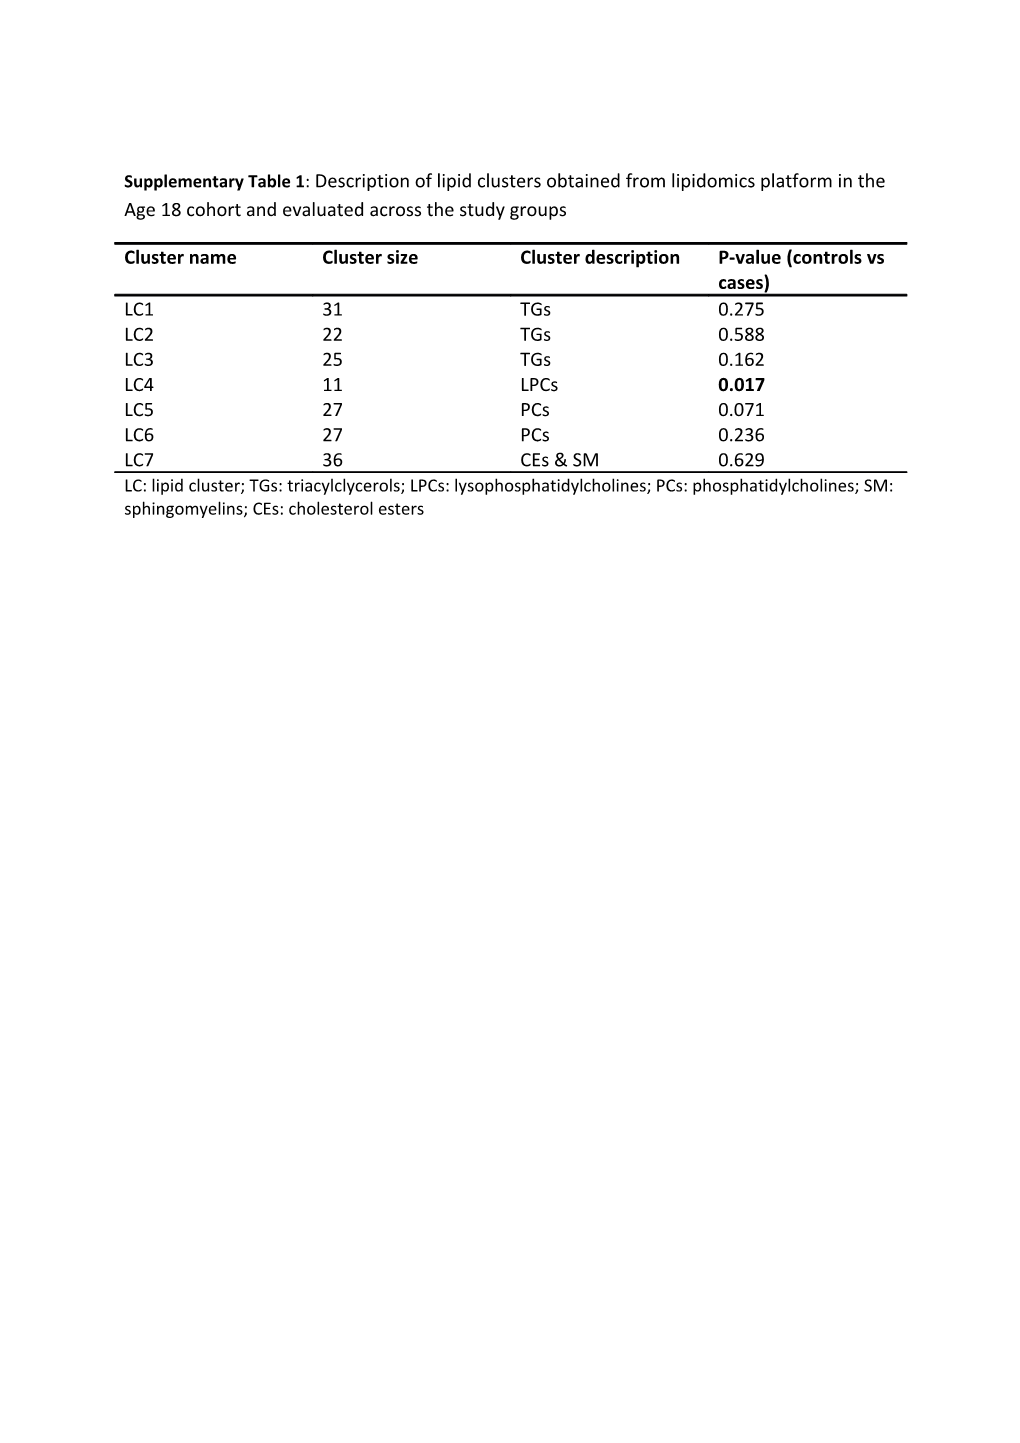 Supplementary Table 1 : Description of Lipid Clusters Obtained from Lipidomics Platform